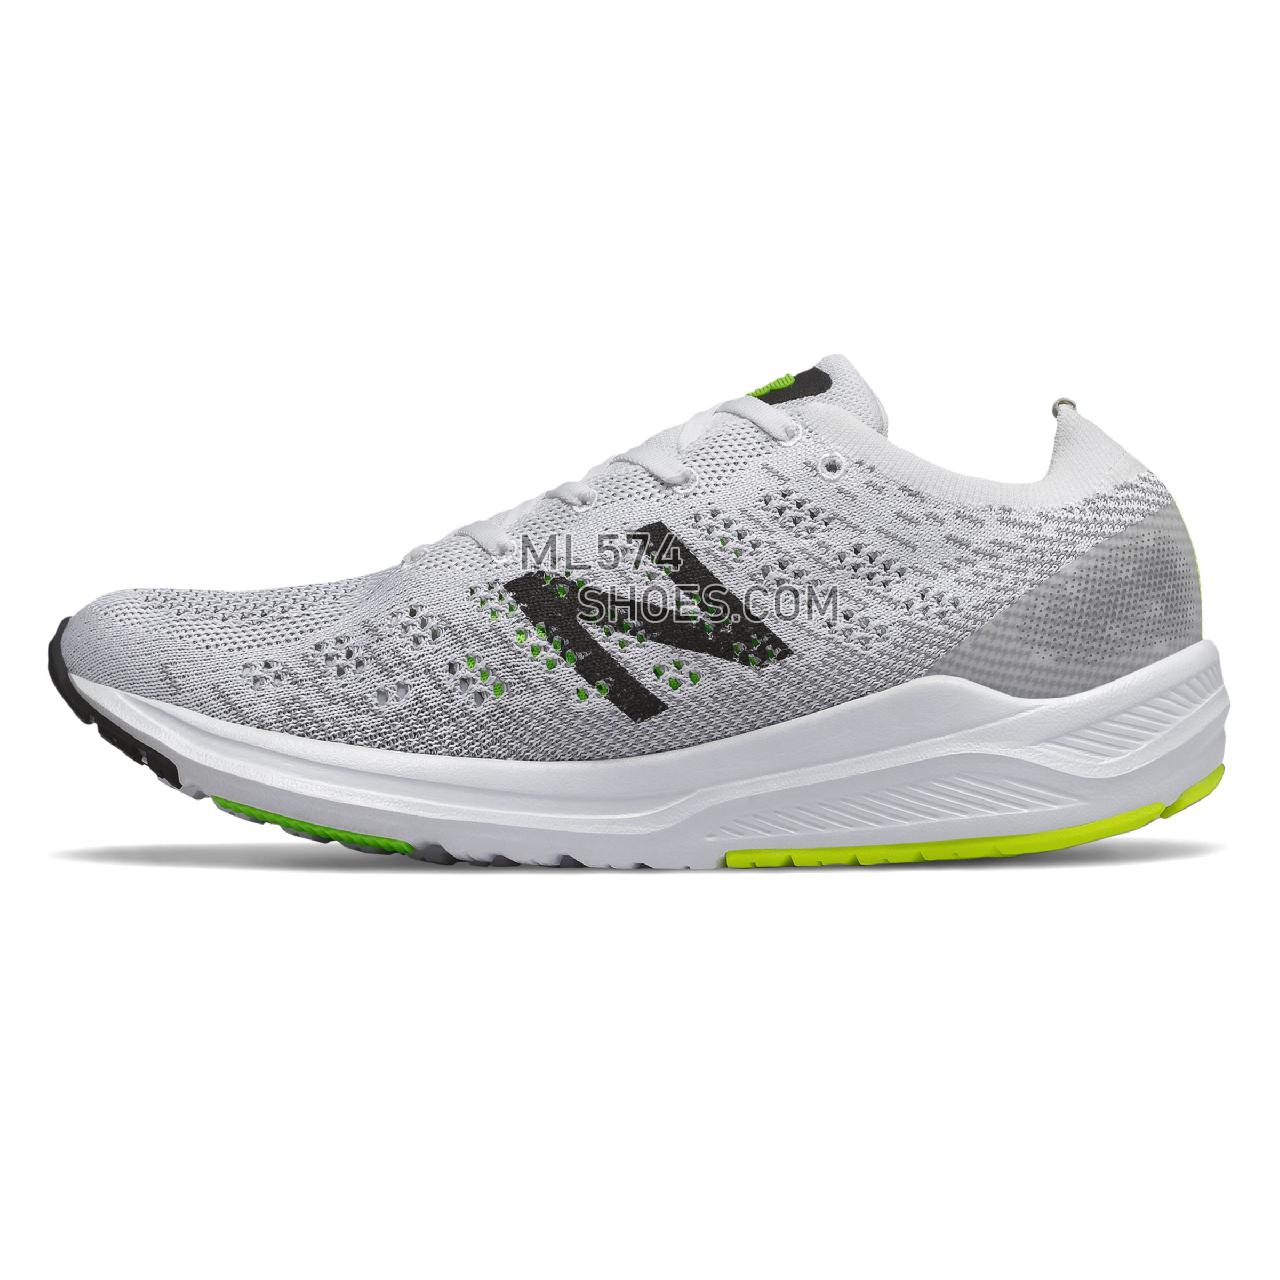 New Balance 890v7 - Men's Neutral Running - White with Black and RGB Green - M890WB7